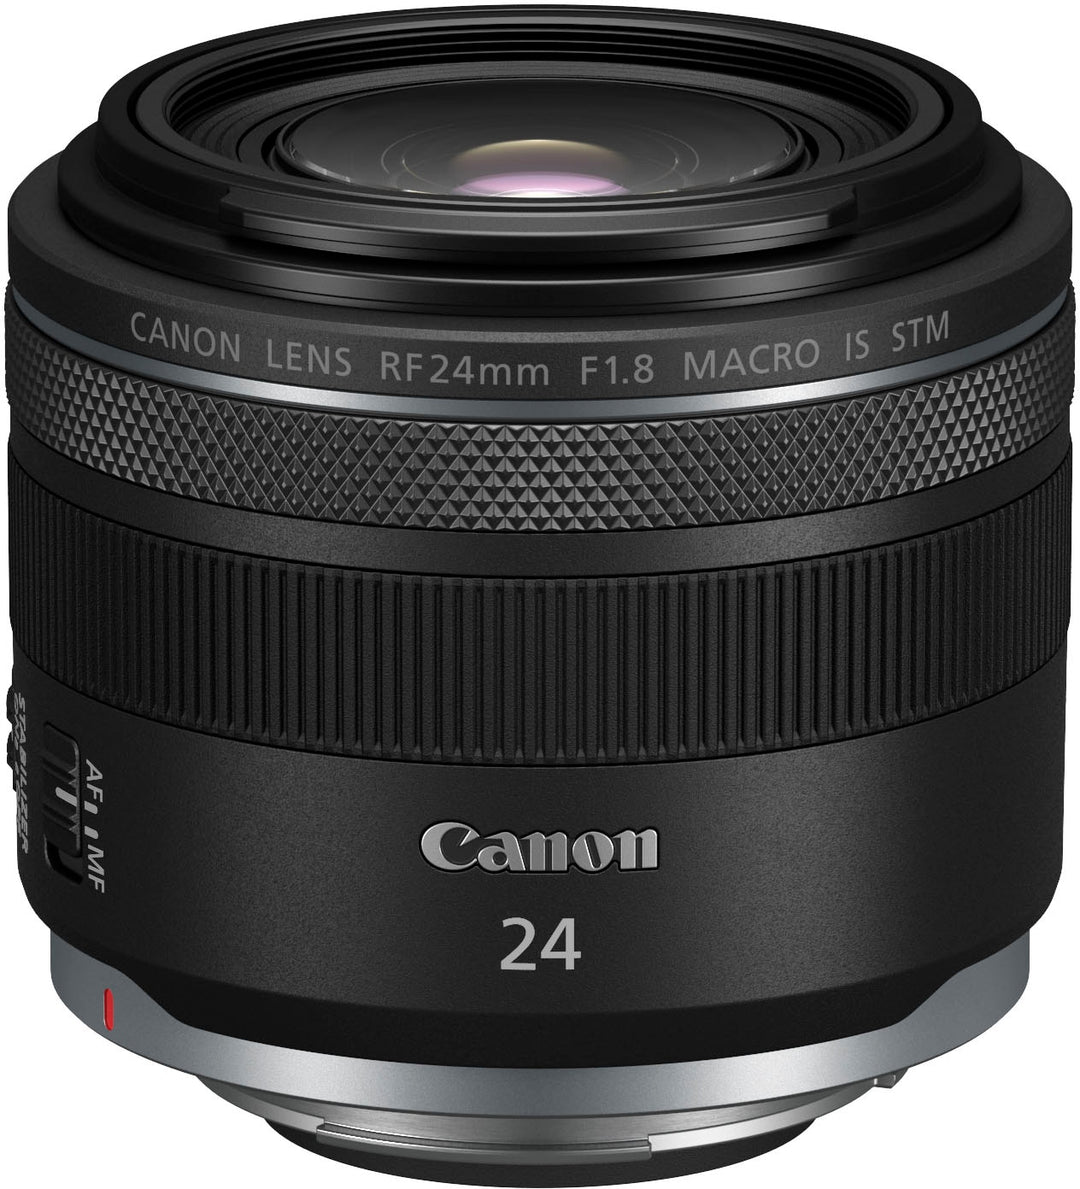 Canon - RF 24mm f/1.8 MACRO IS STM Wide Angle Prime Lens - Black_4